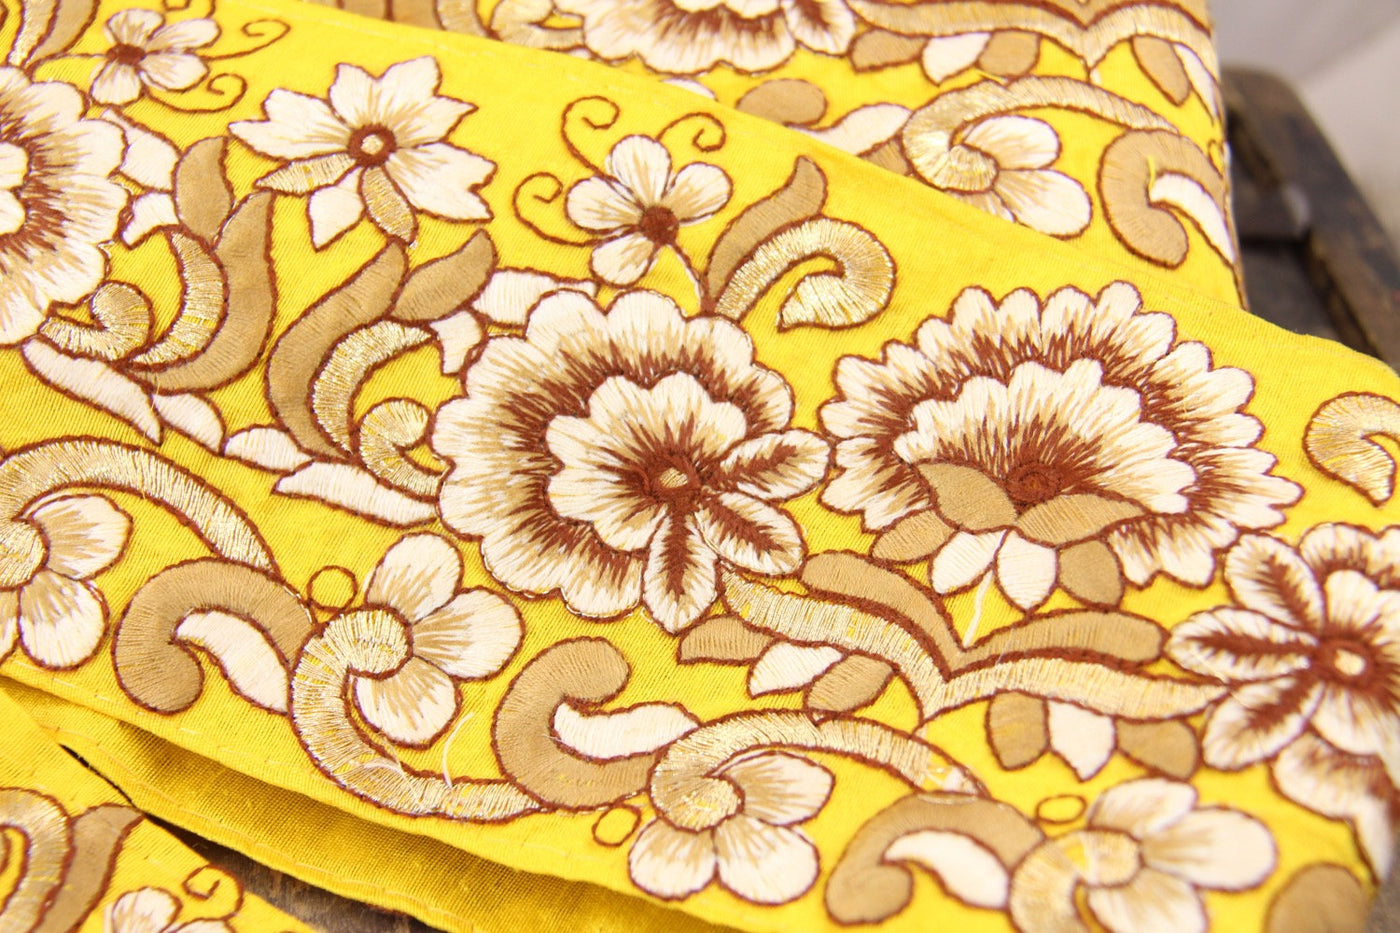 Yellow and Gold Silk Trim, Sari Border from India, 4" Ribbon, Gen Z Yellow Craft & Sewing Supplies